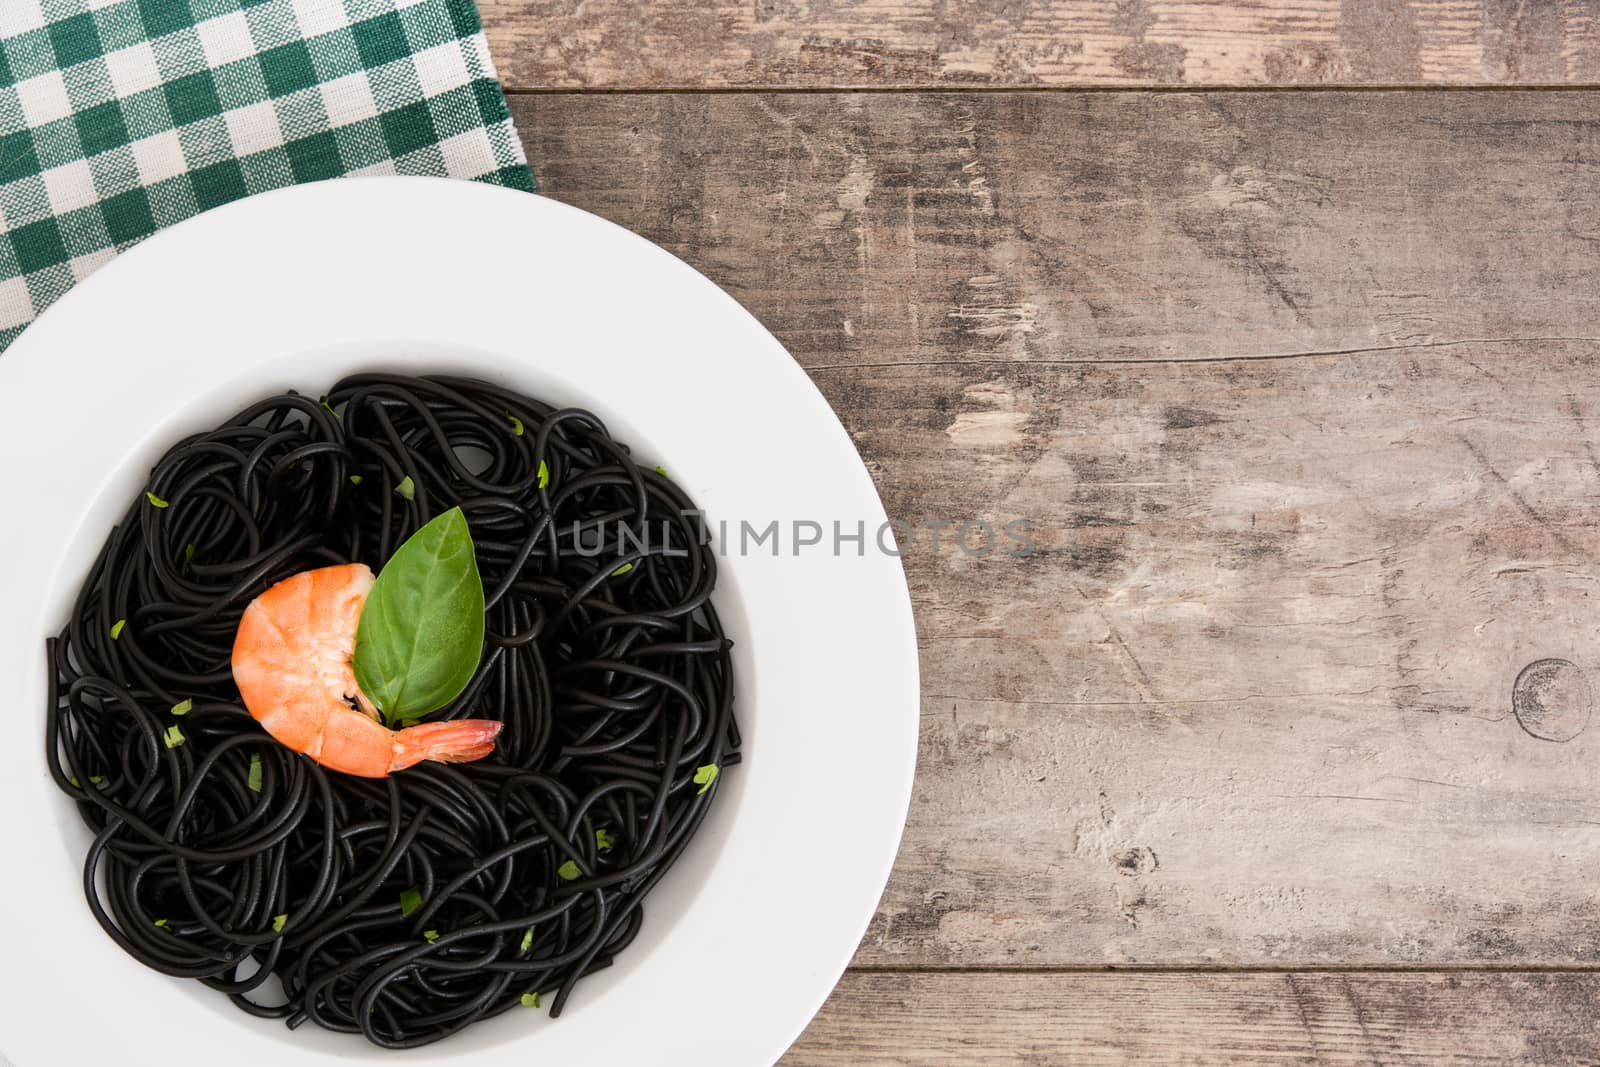 Black spaghetti with prawns and basil on wooden table by chandlervid85